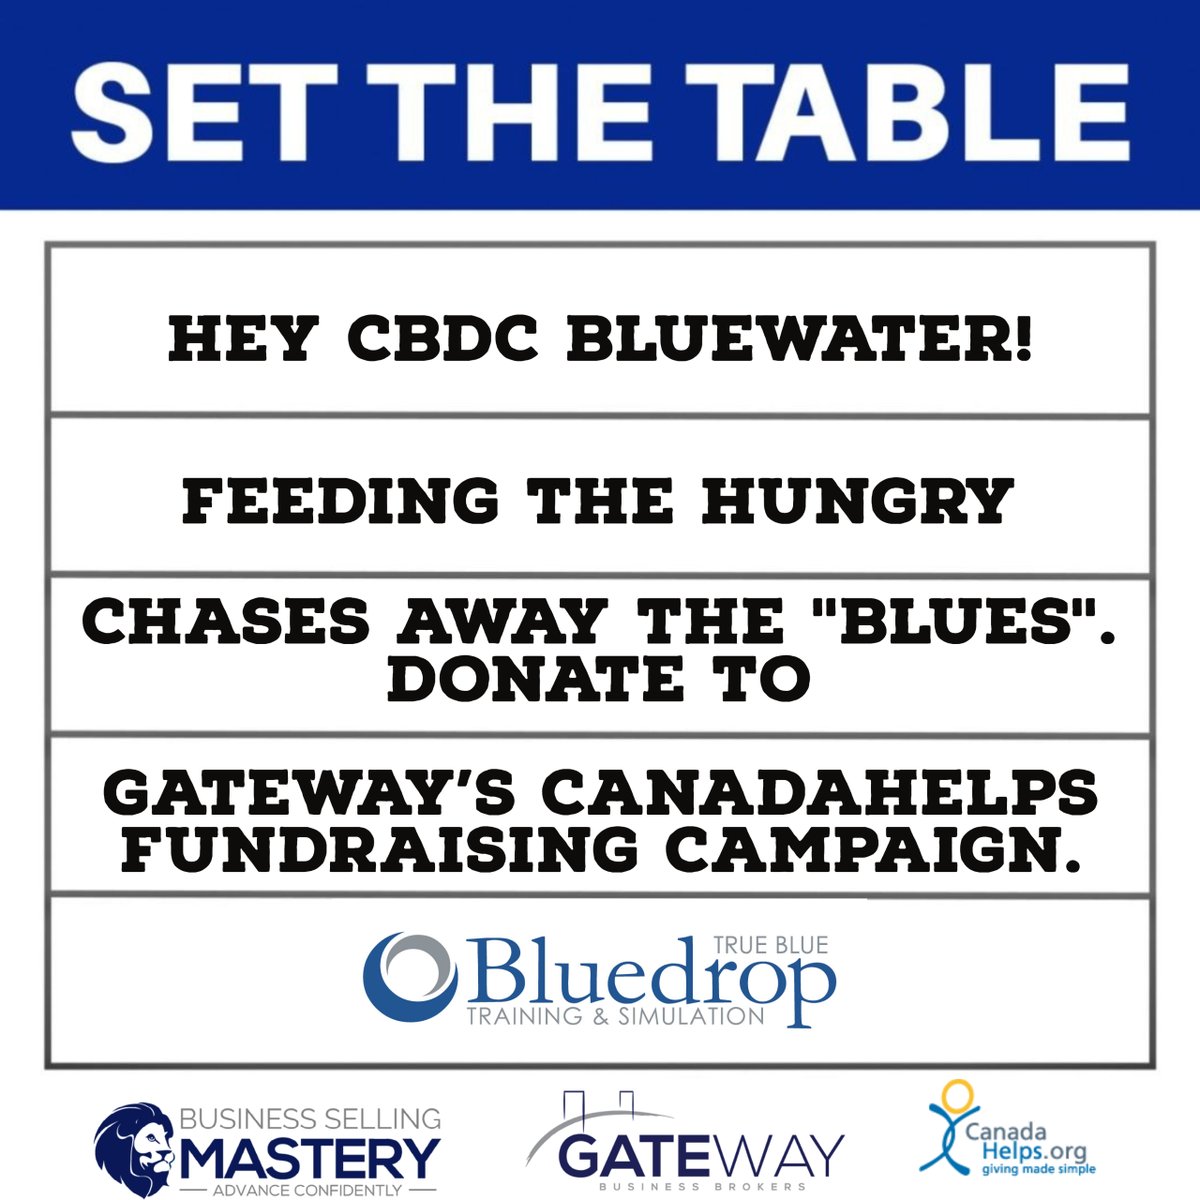 Bluedrop is excited to announce we are participating in @feednovascotia sign wars fundraising campaign. We are challenging CBDC Blue Water to feed the hunger and donate! For every donation Gateway Business Brokers will match dollar for dollar. Be the change!